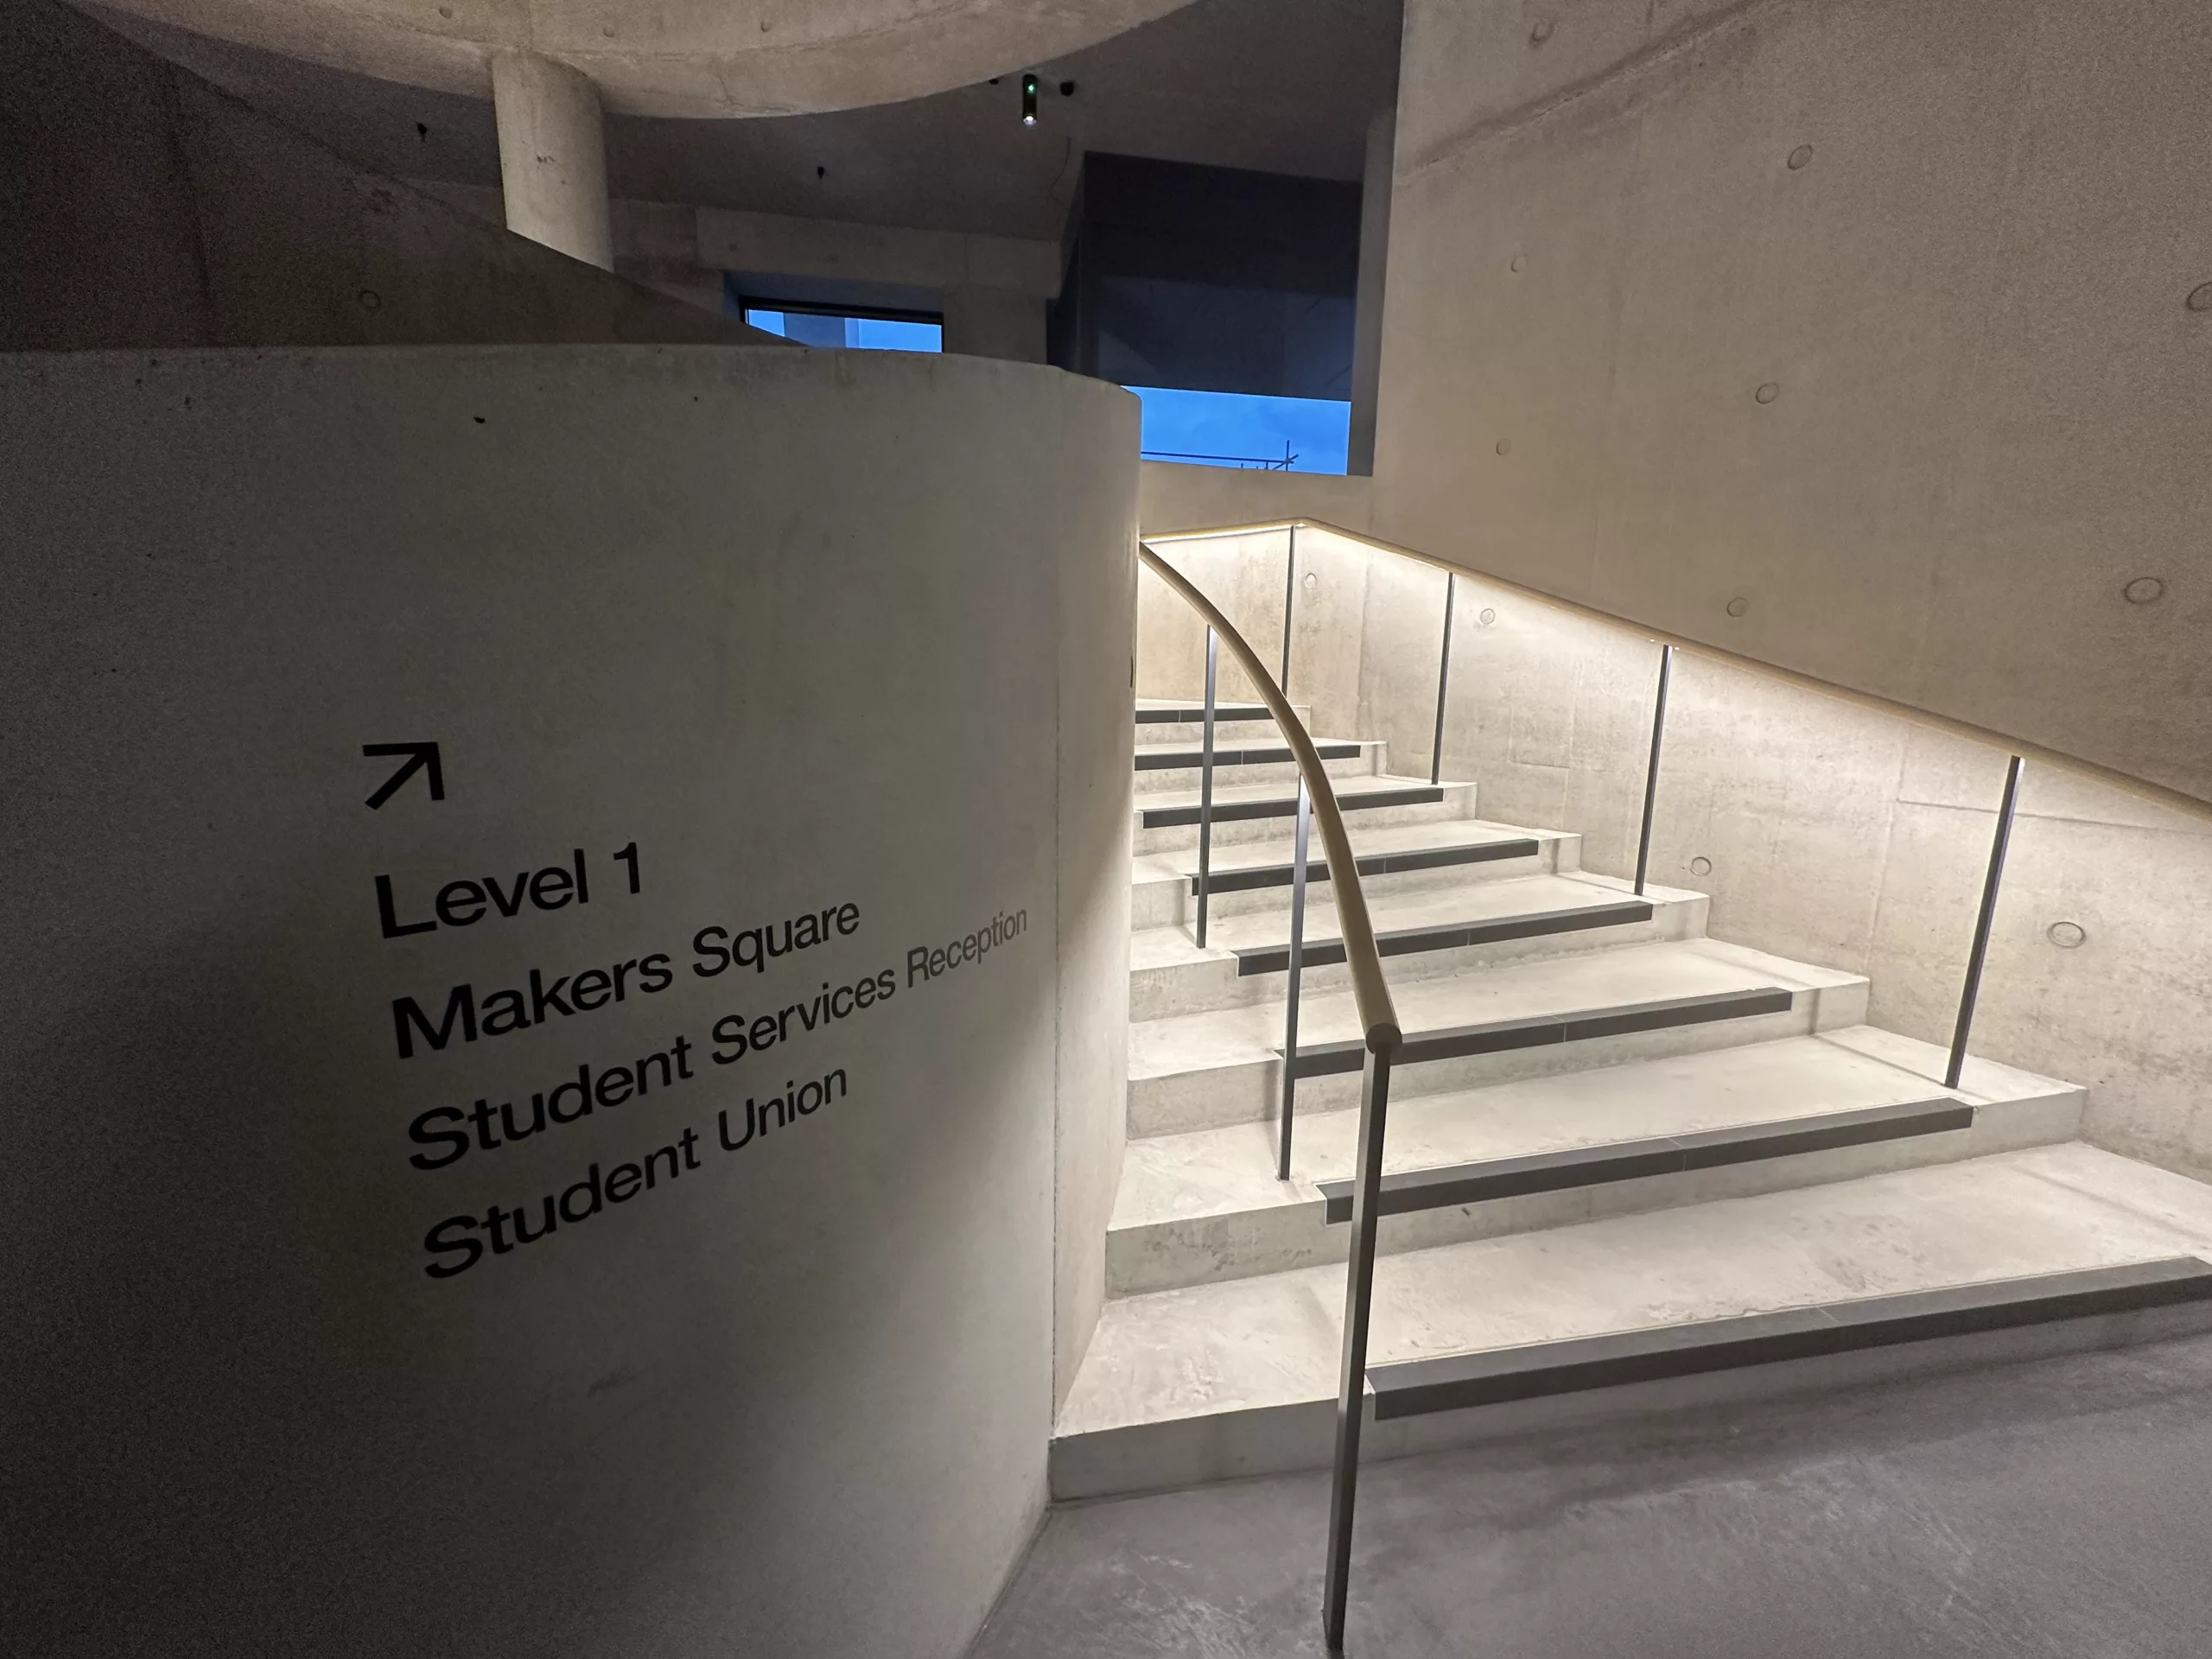 London College of Fashion, Stratford Waterfront | bespoke timber LED handrail | The Light Lab